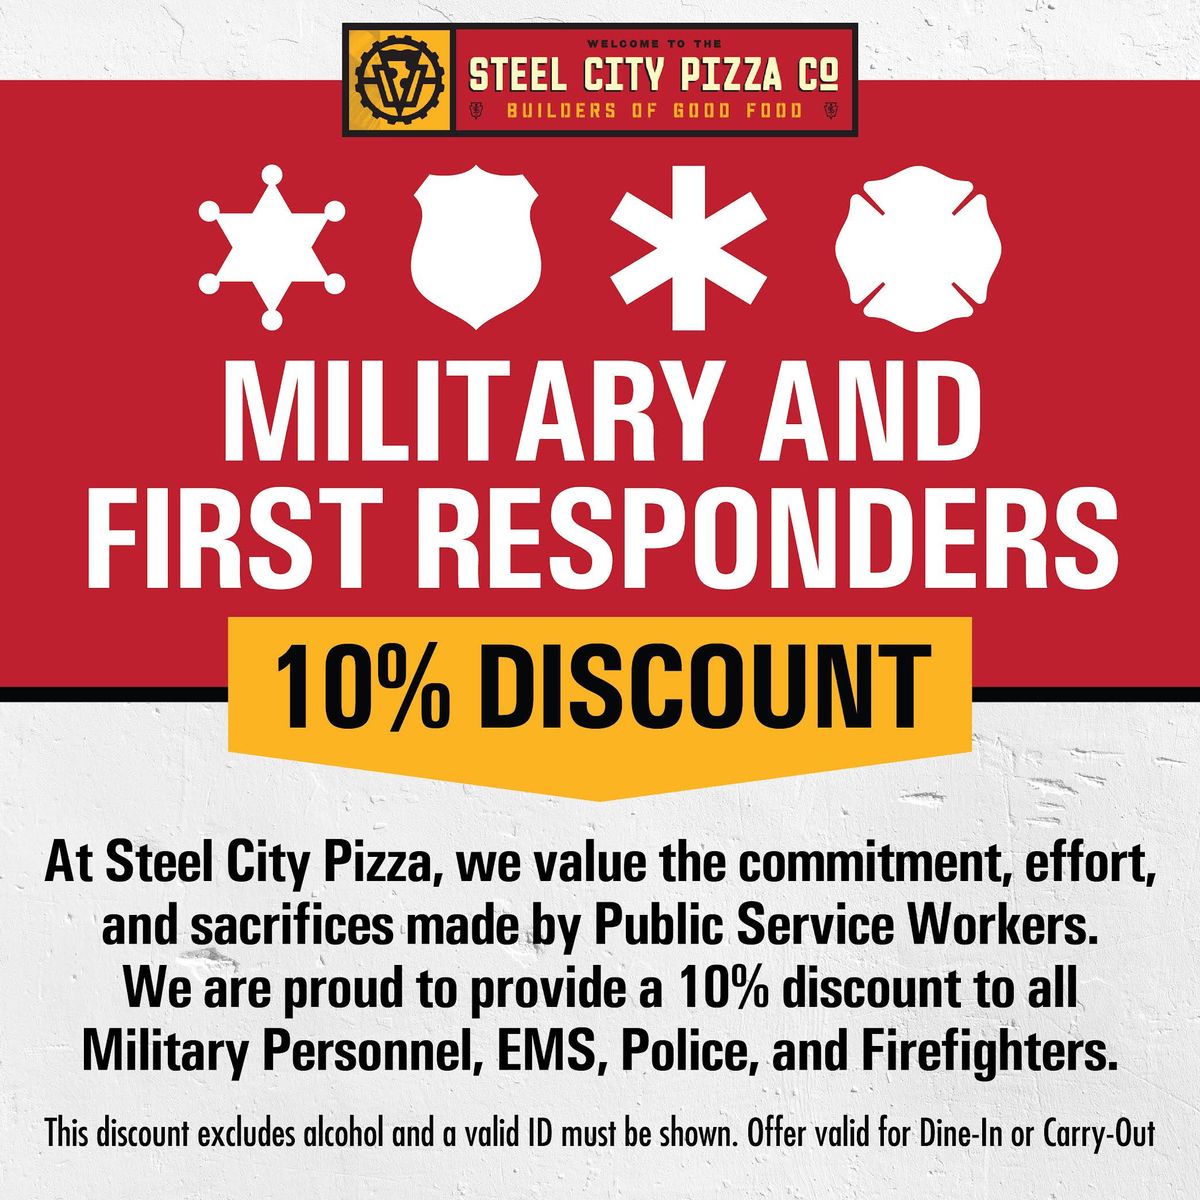 Military and first responders 10% discount poster